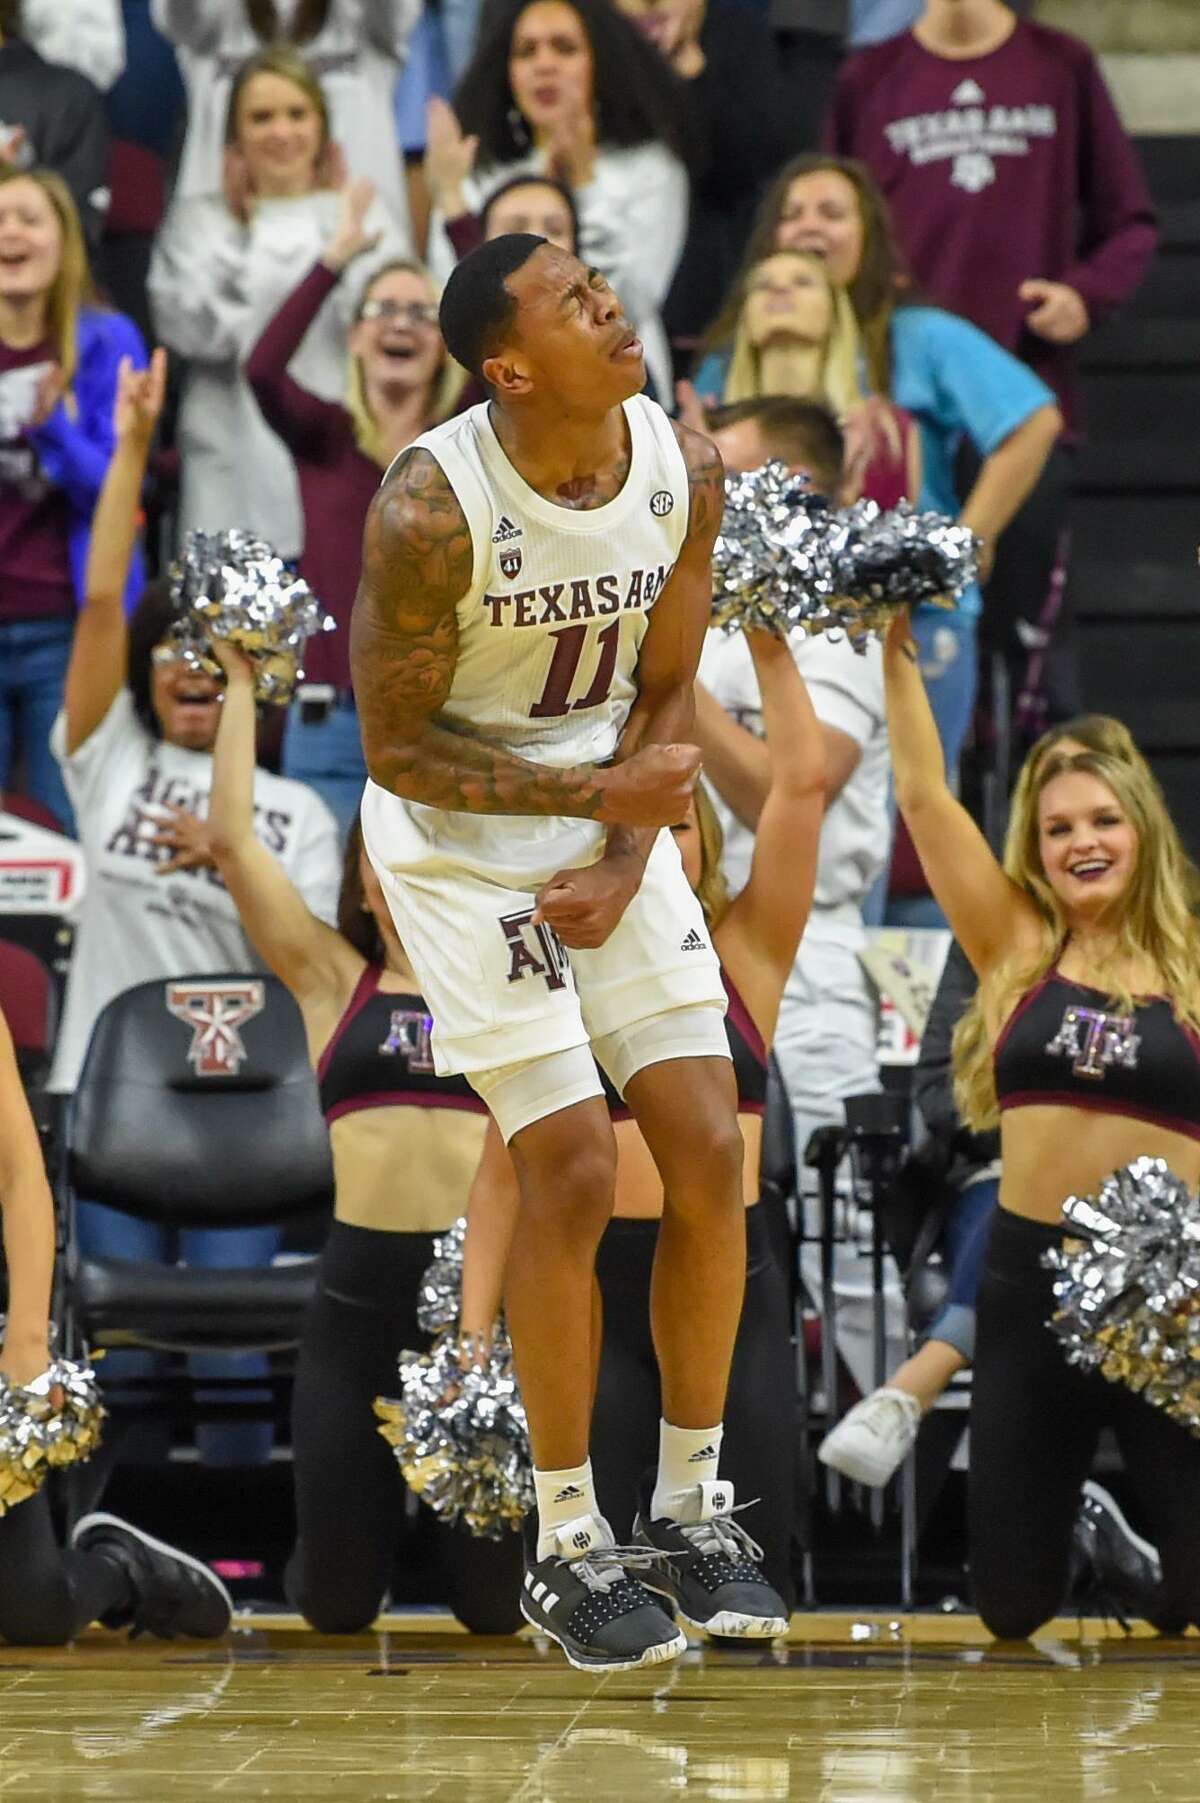 After a largely inactive first half, Texas A&M guard Wendell Mitchell had himself a ball in the second half by scoring all of his 22 points — nearly outscoring Kansas State in the process— to key Saturday’s victory.